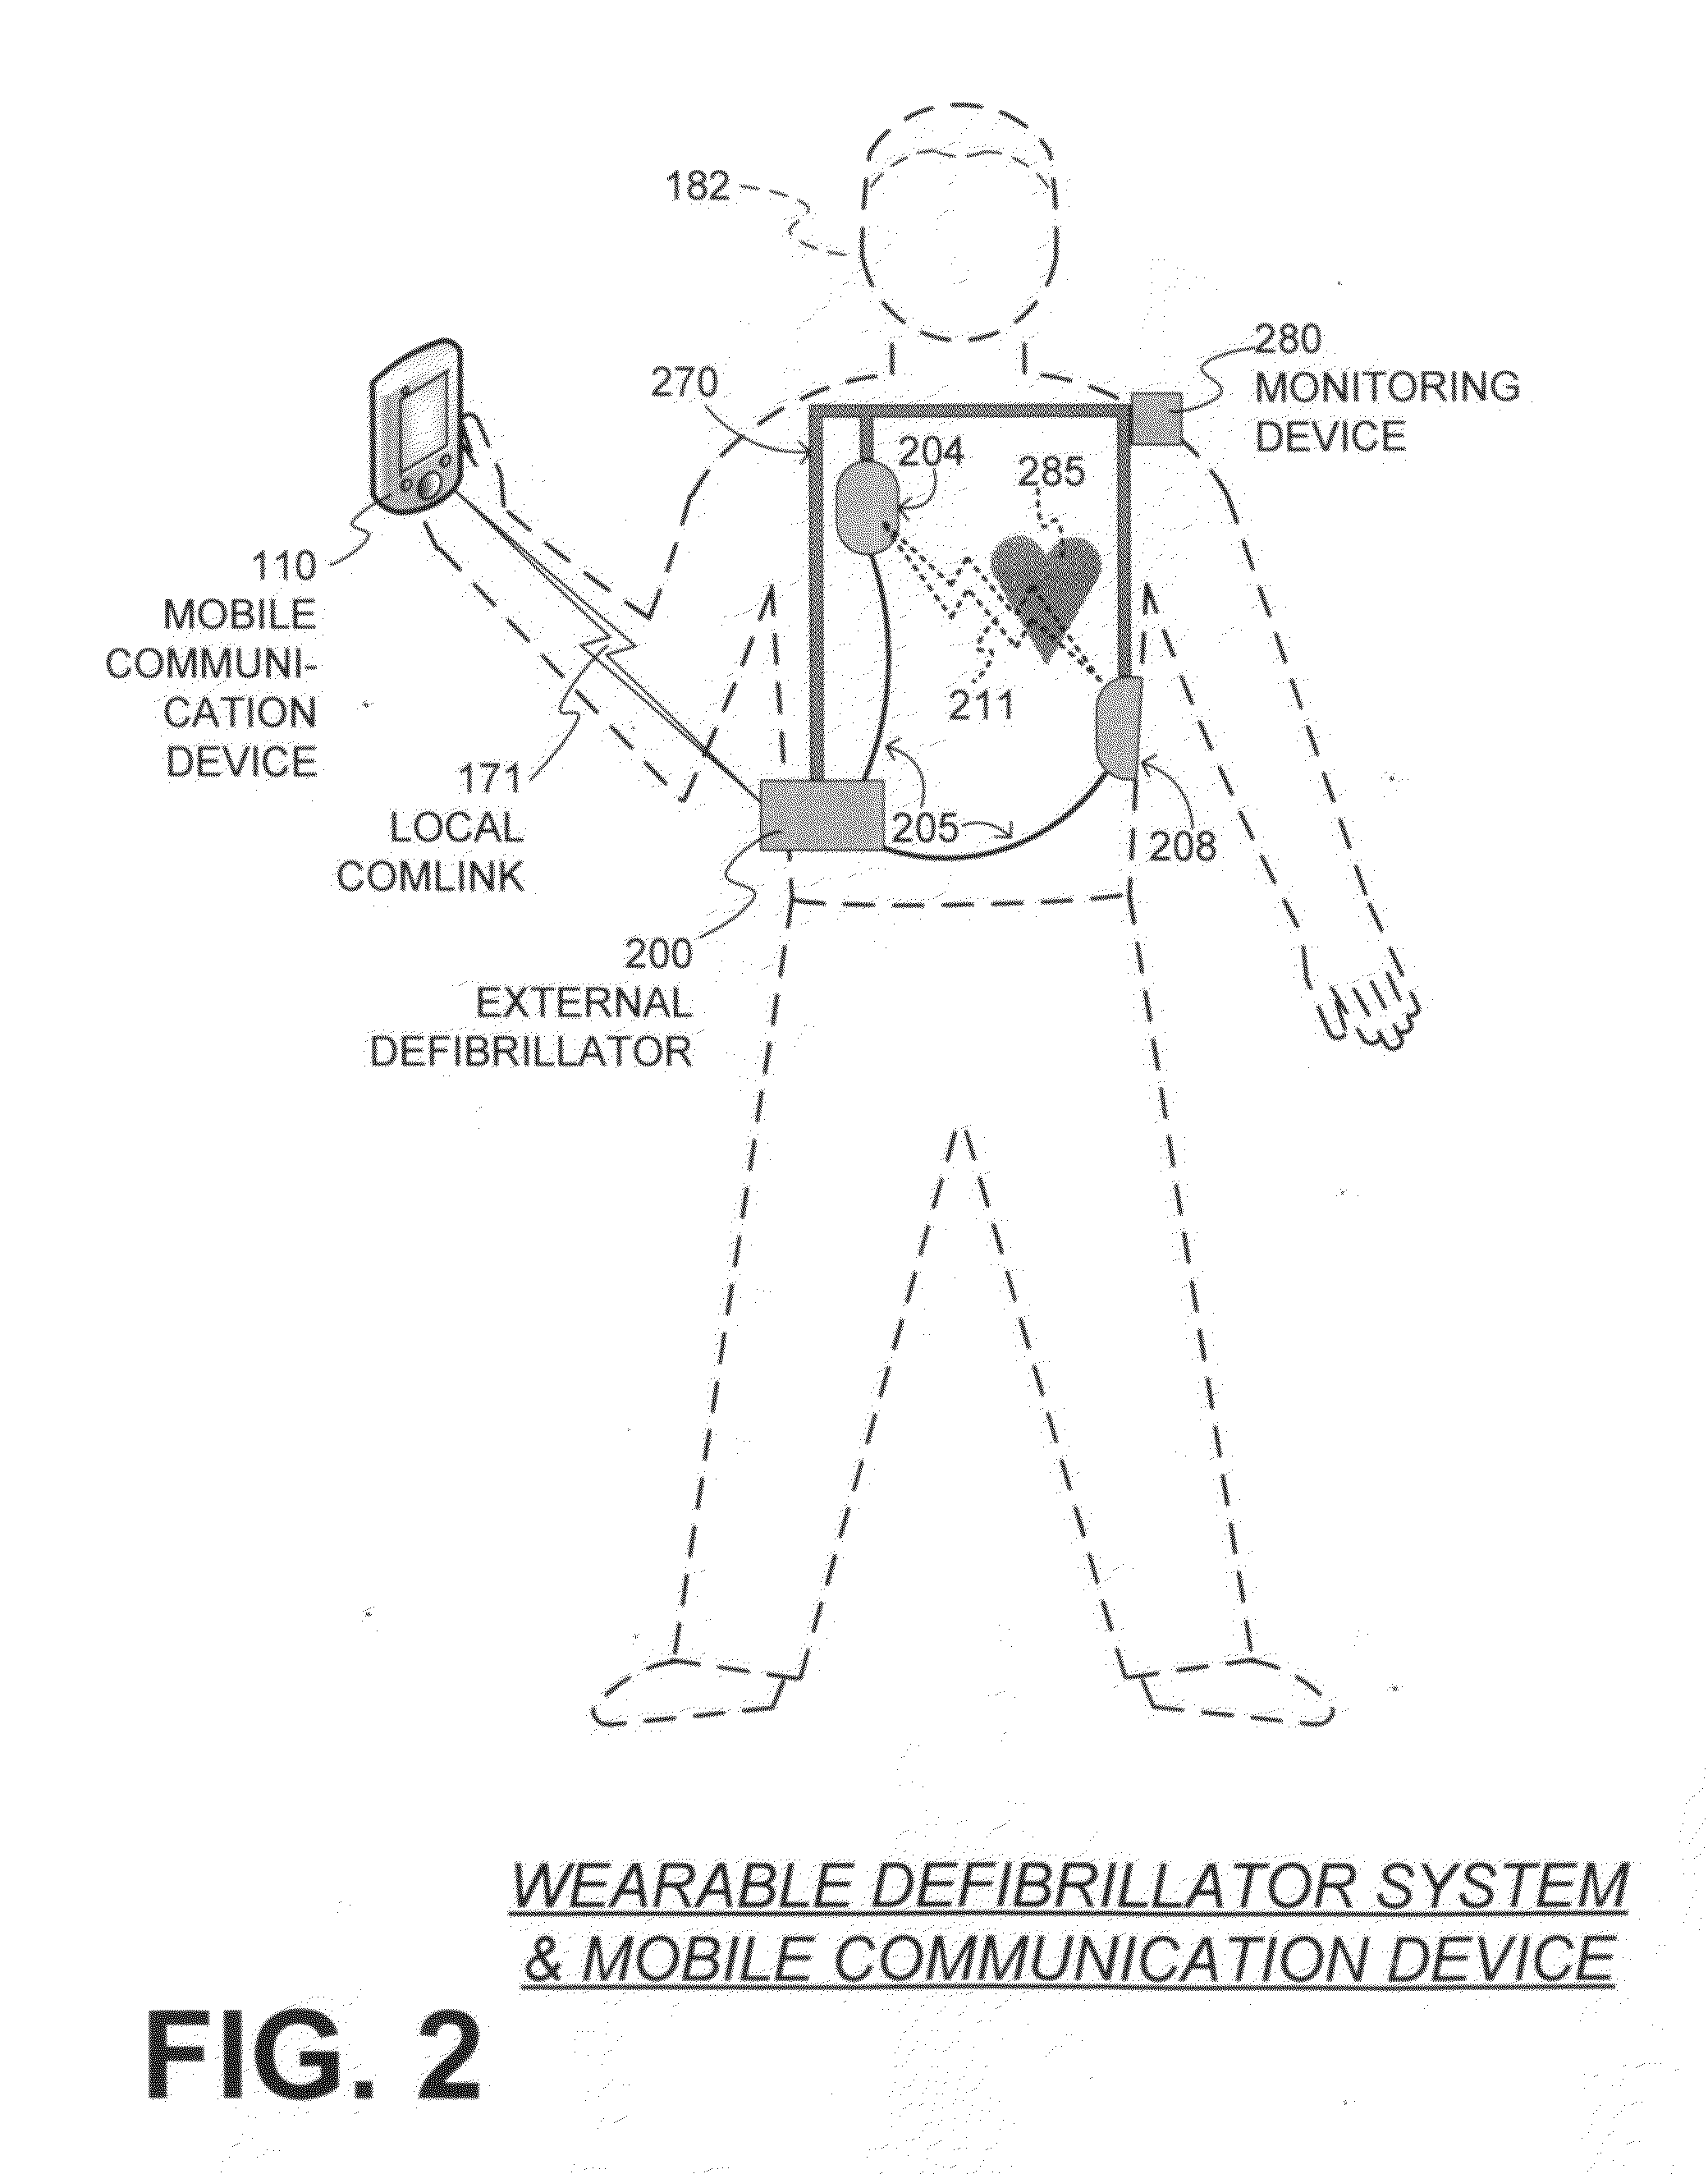 Mobile communication device & app for wearable defibrillator system